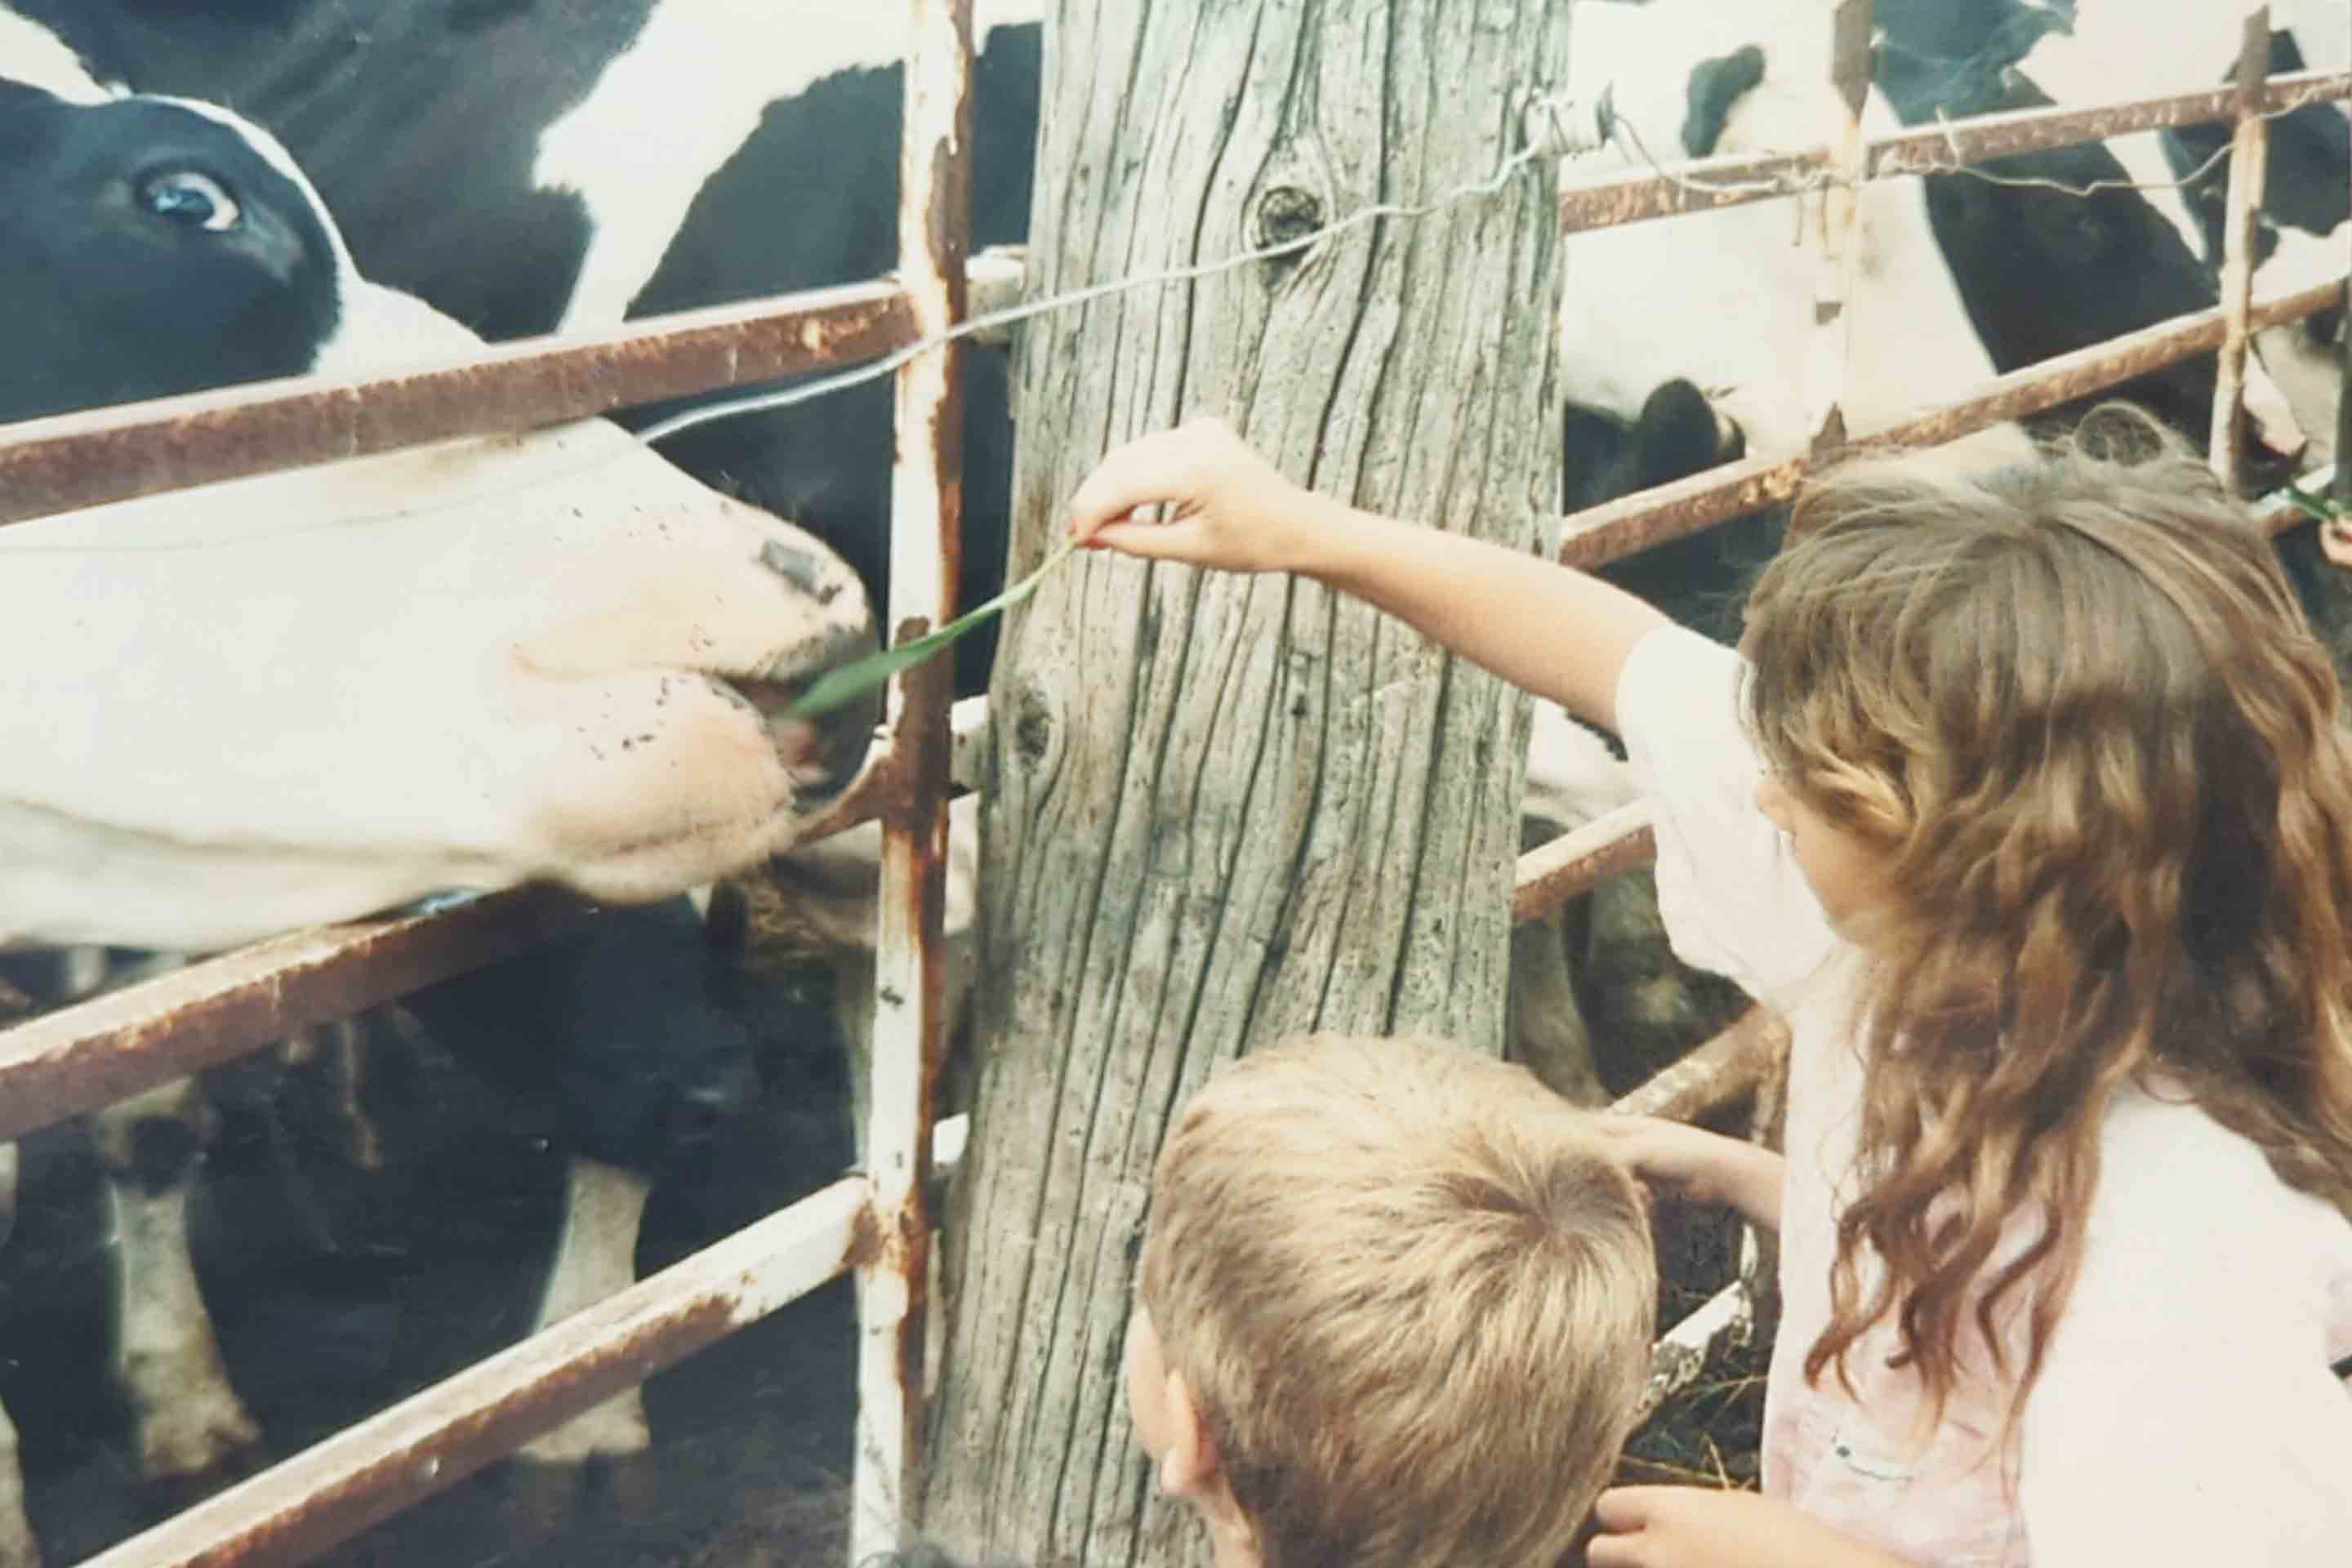 Kids at the Farm 1980s